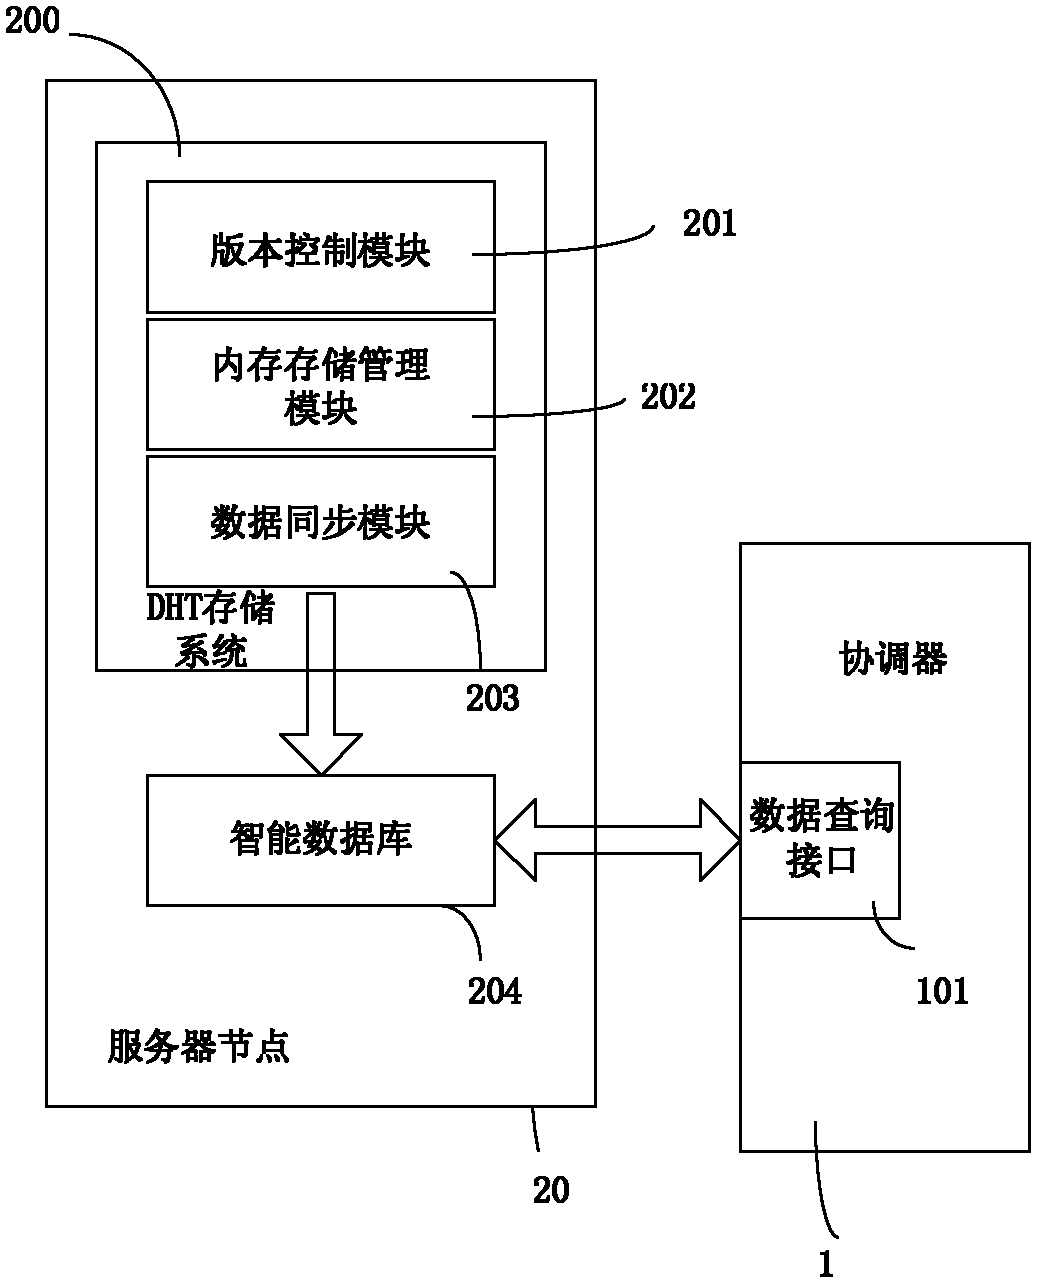 Mass information storage system and implementation method